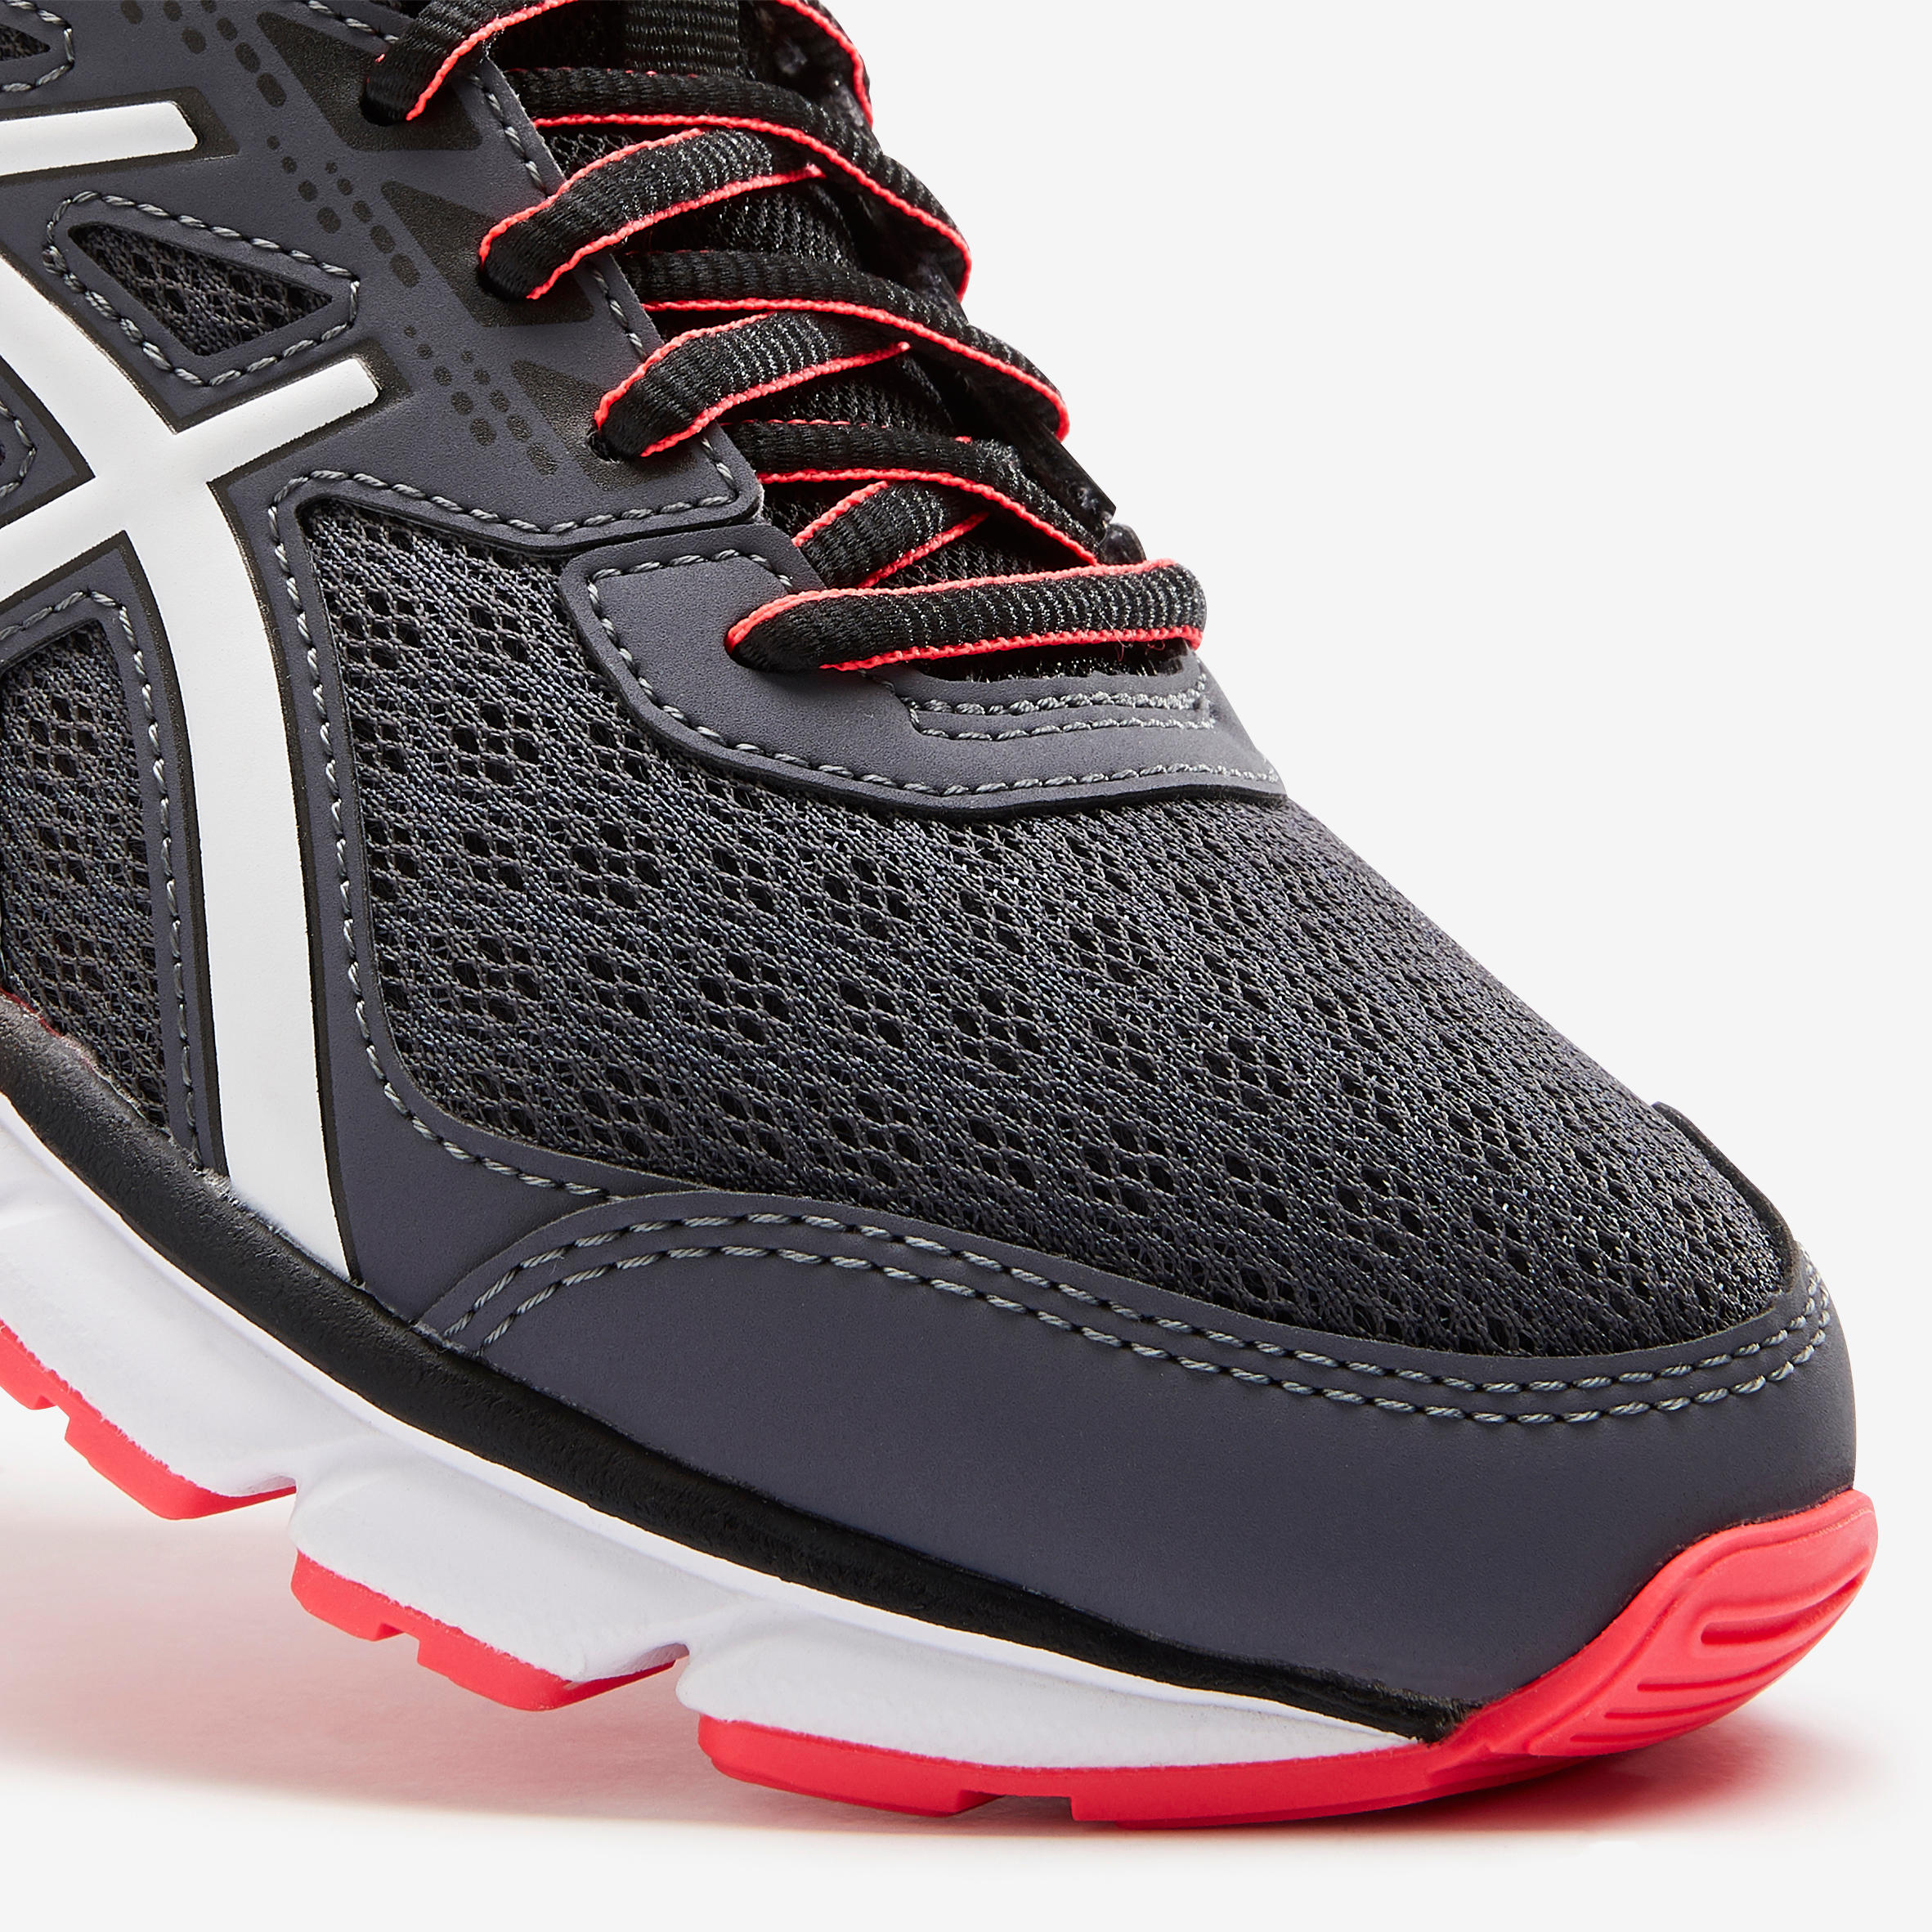 asics windhawk review